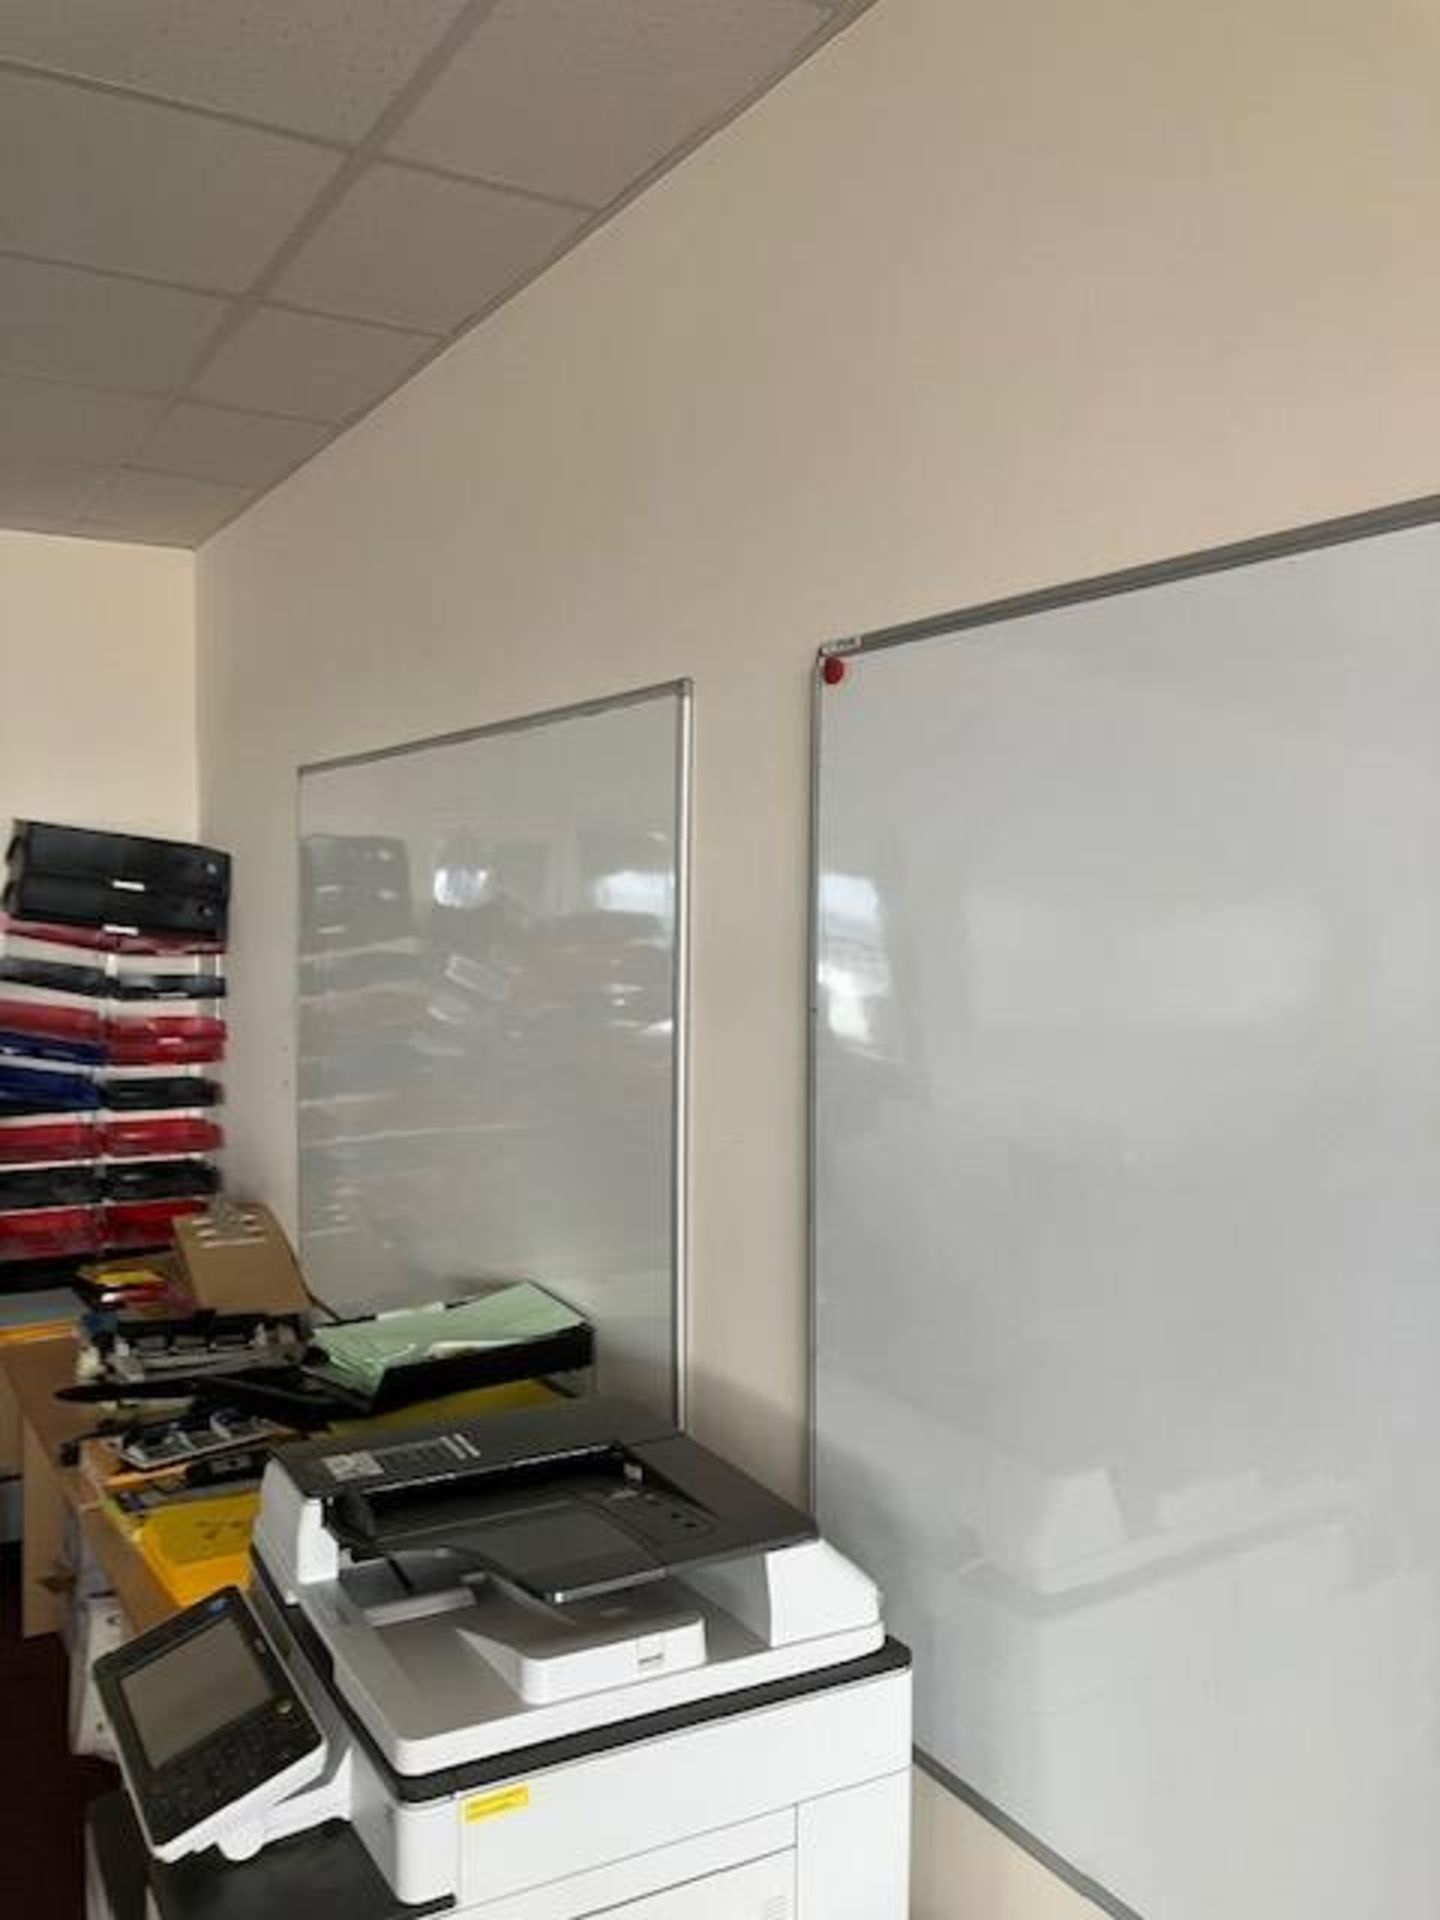 Six whiteboards, approx 1.8 x 1.2m, two whiteboards approx 1.2 x 800m - Image 3 of 5